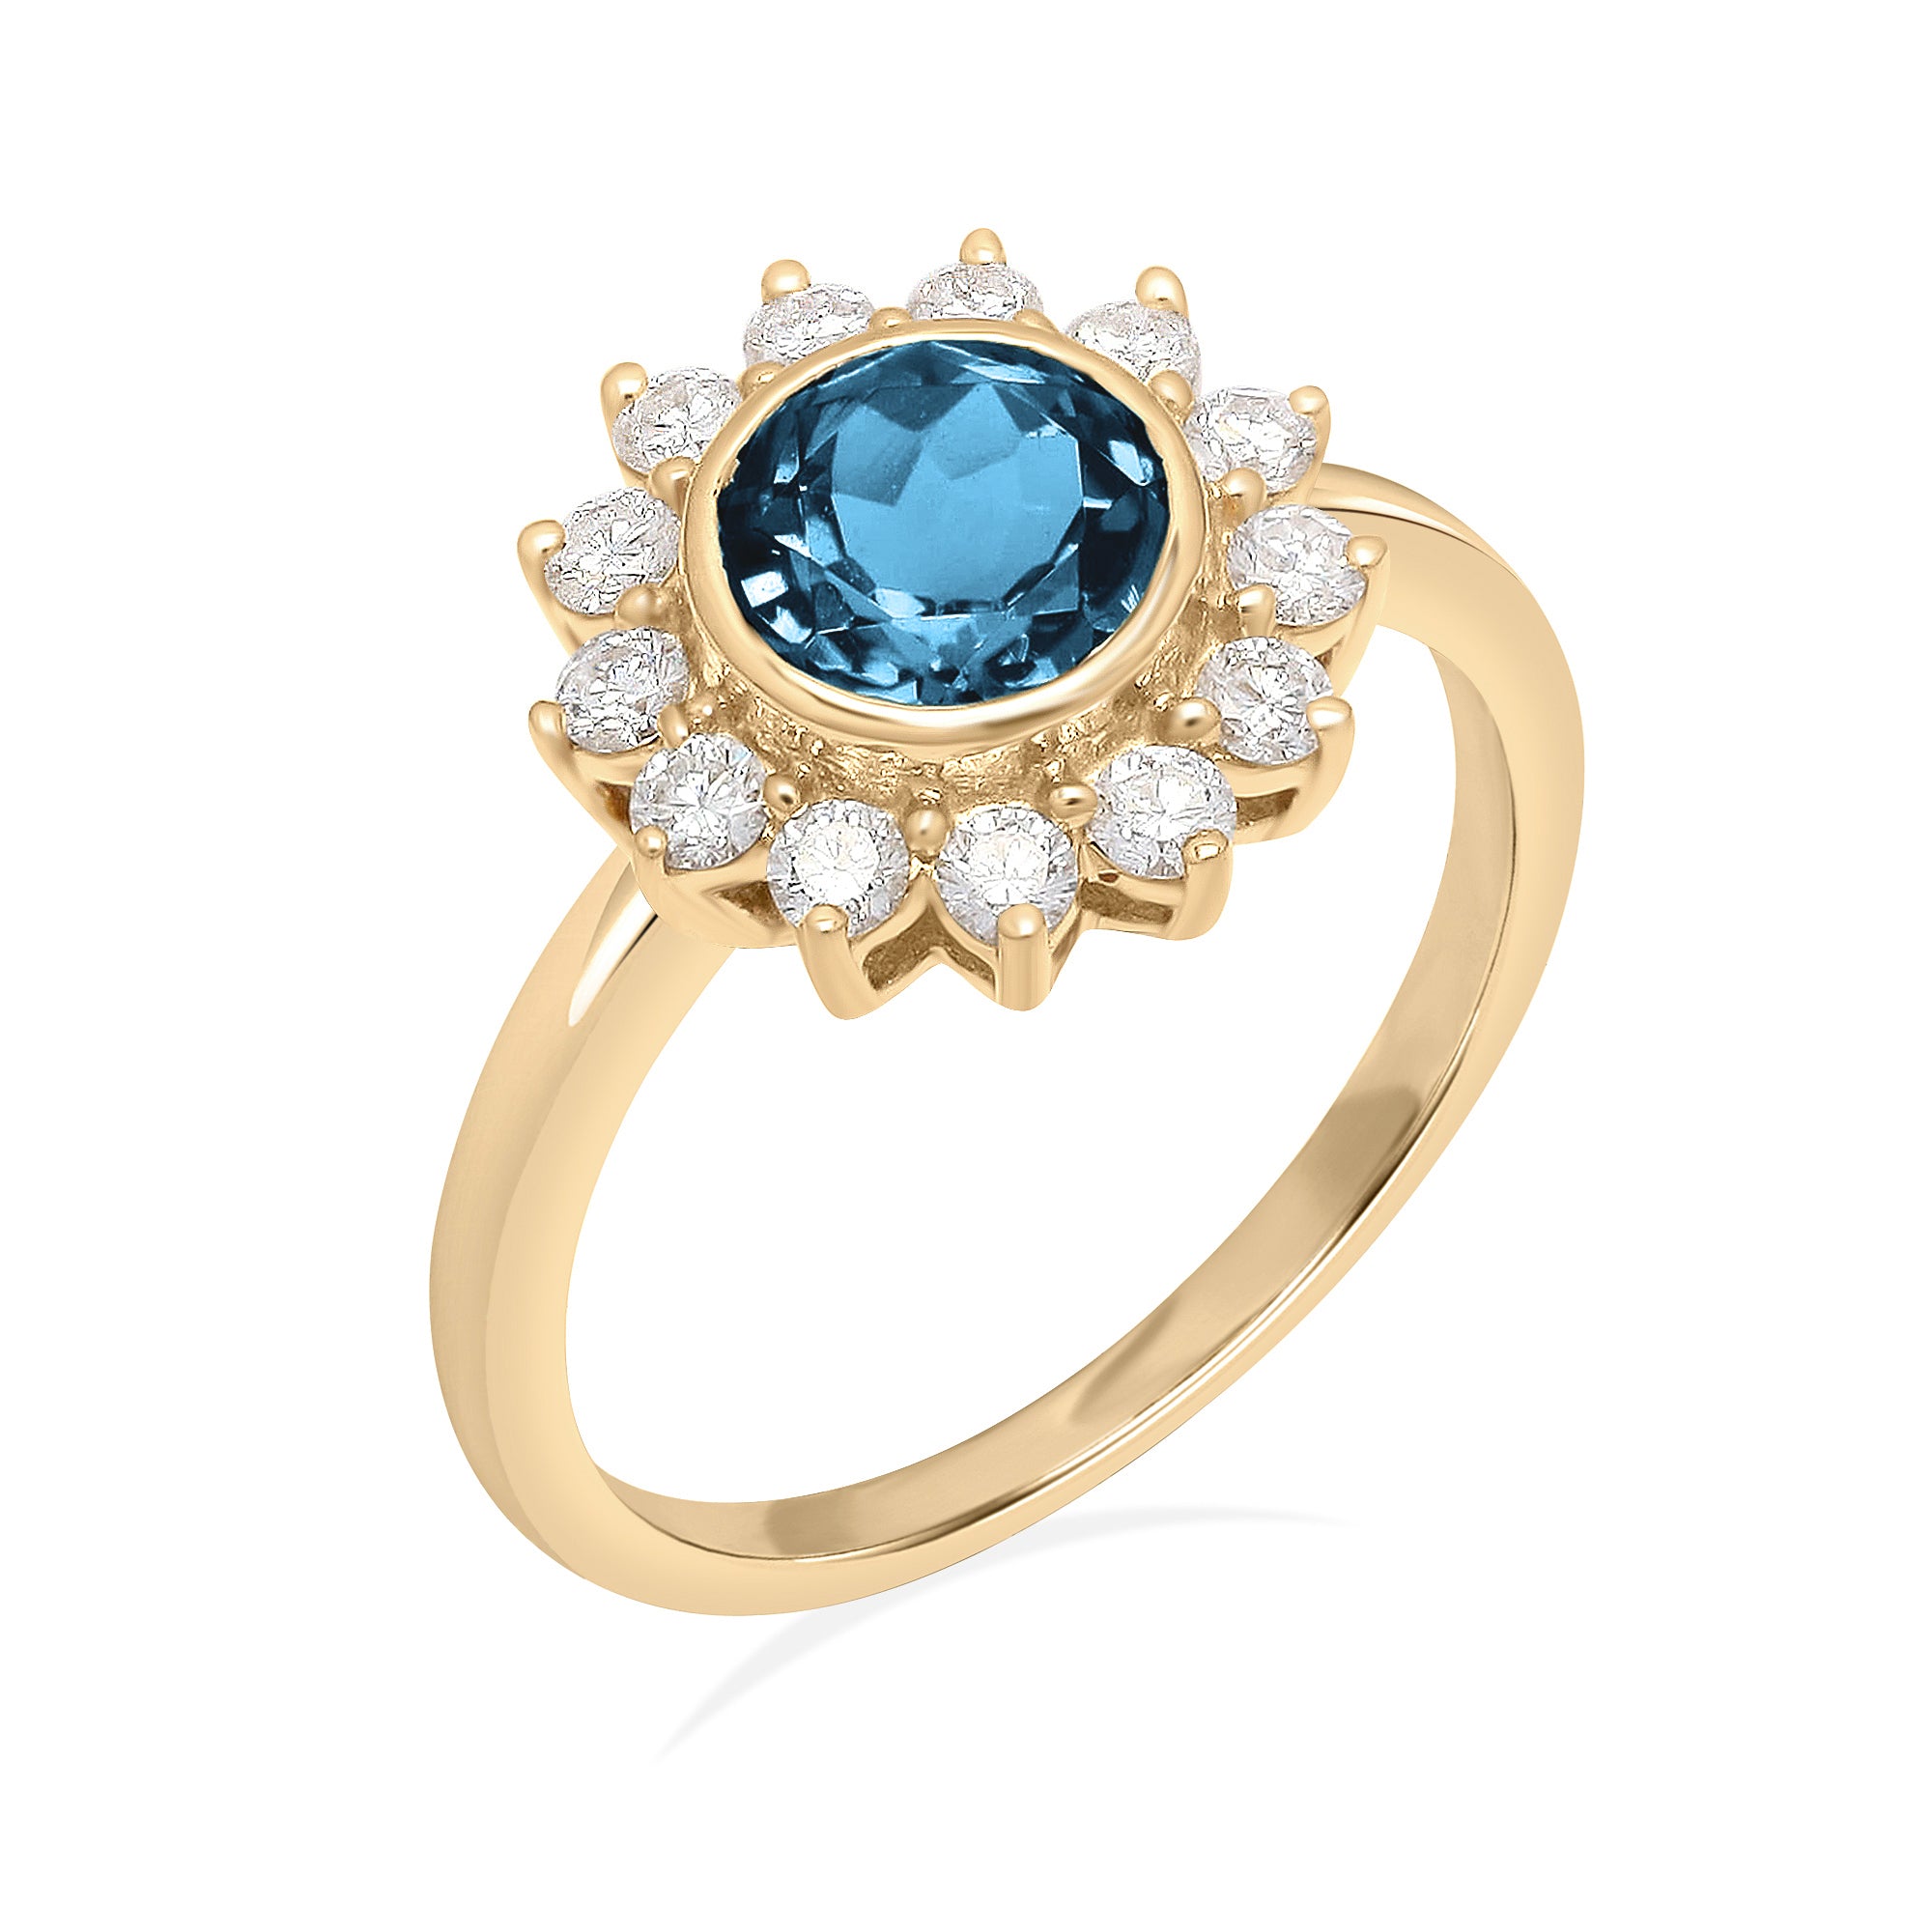 Natural London Blue Topaz Ring, 14k Solid Gold Ring, Engagement Ring, Diamond Ring, Solitaire Ring